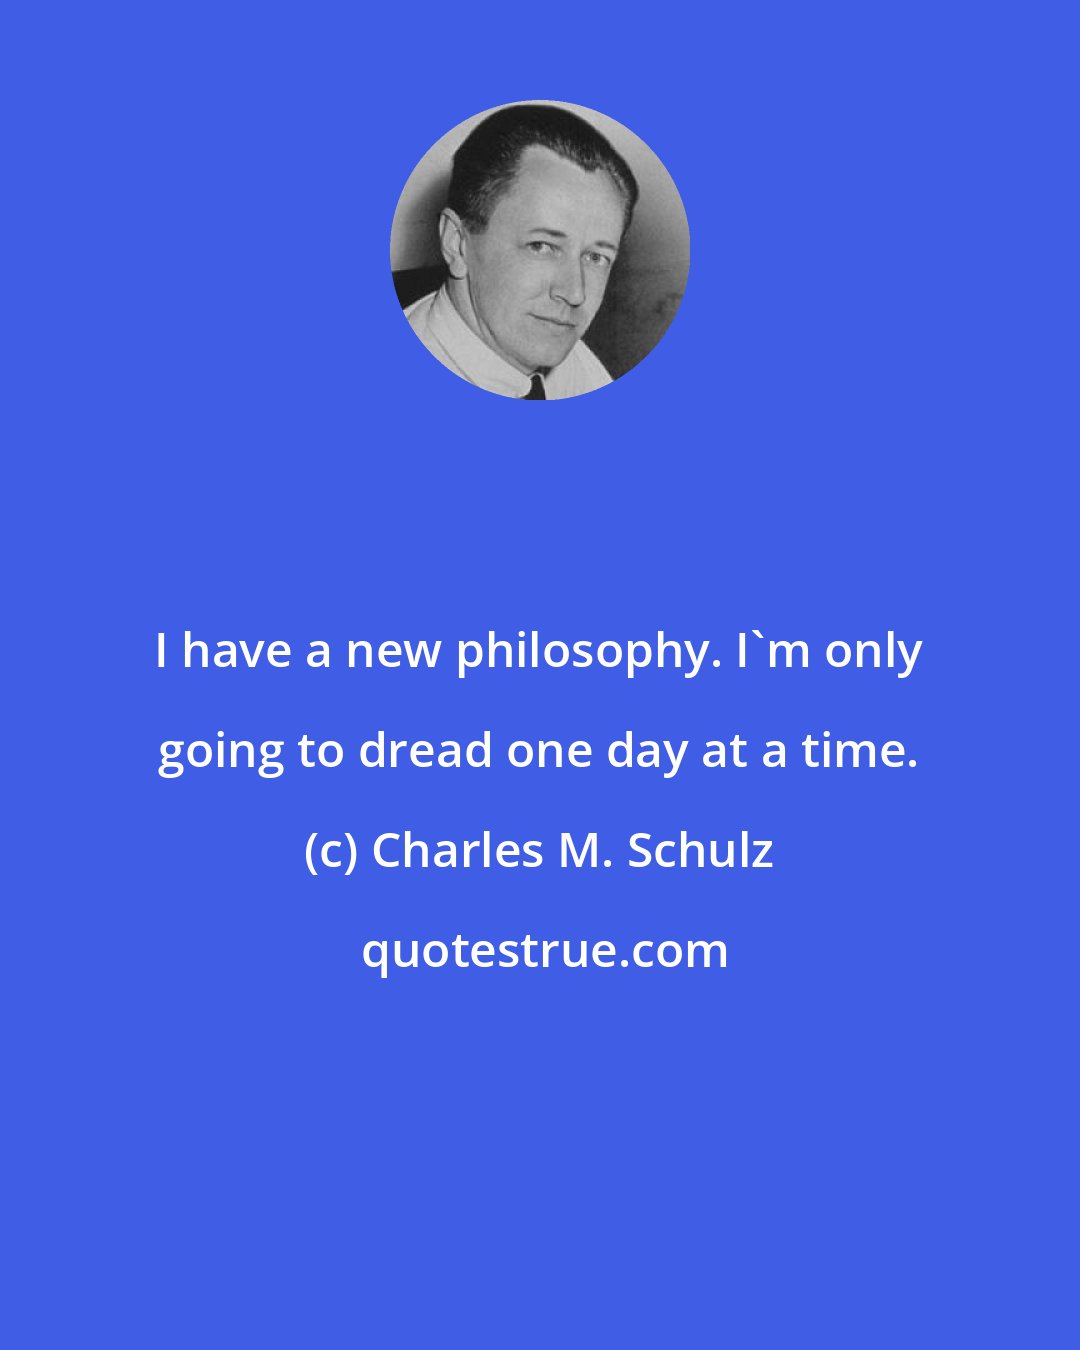 Charles M. Schulz: I have a new philosophy. I'm only going to dread one day at a time.